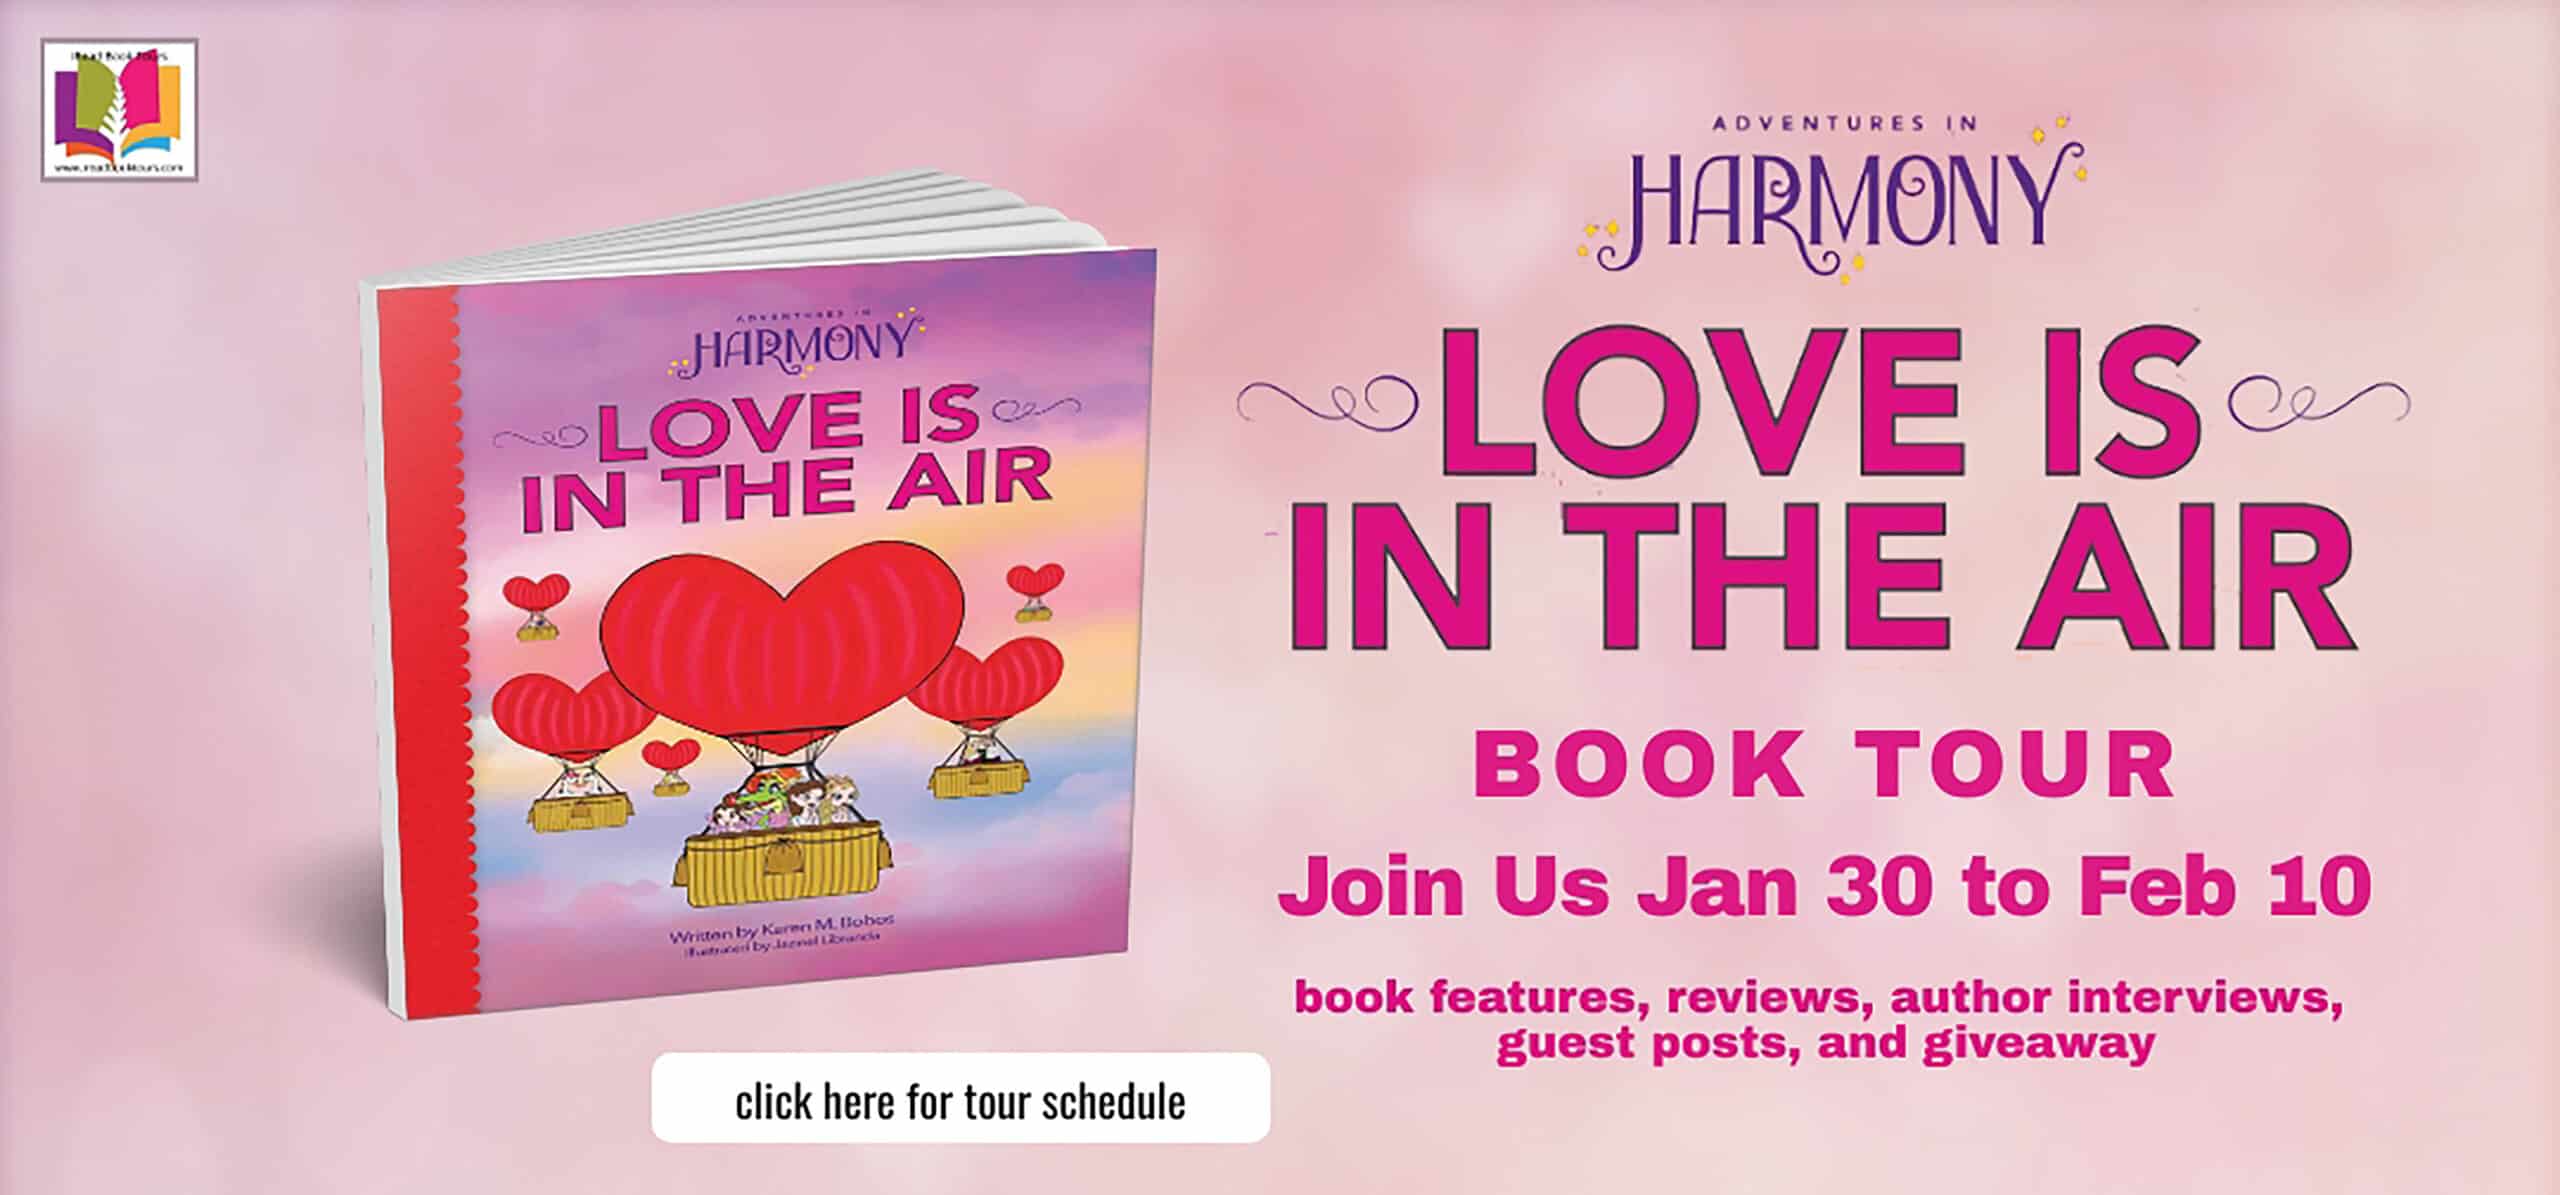 Love is in the Air by Karen M. Bobos (Adventures in Harmony #7) | Children's Book Review